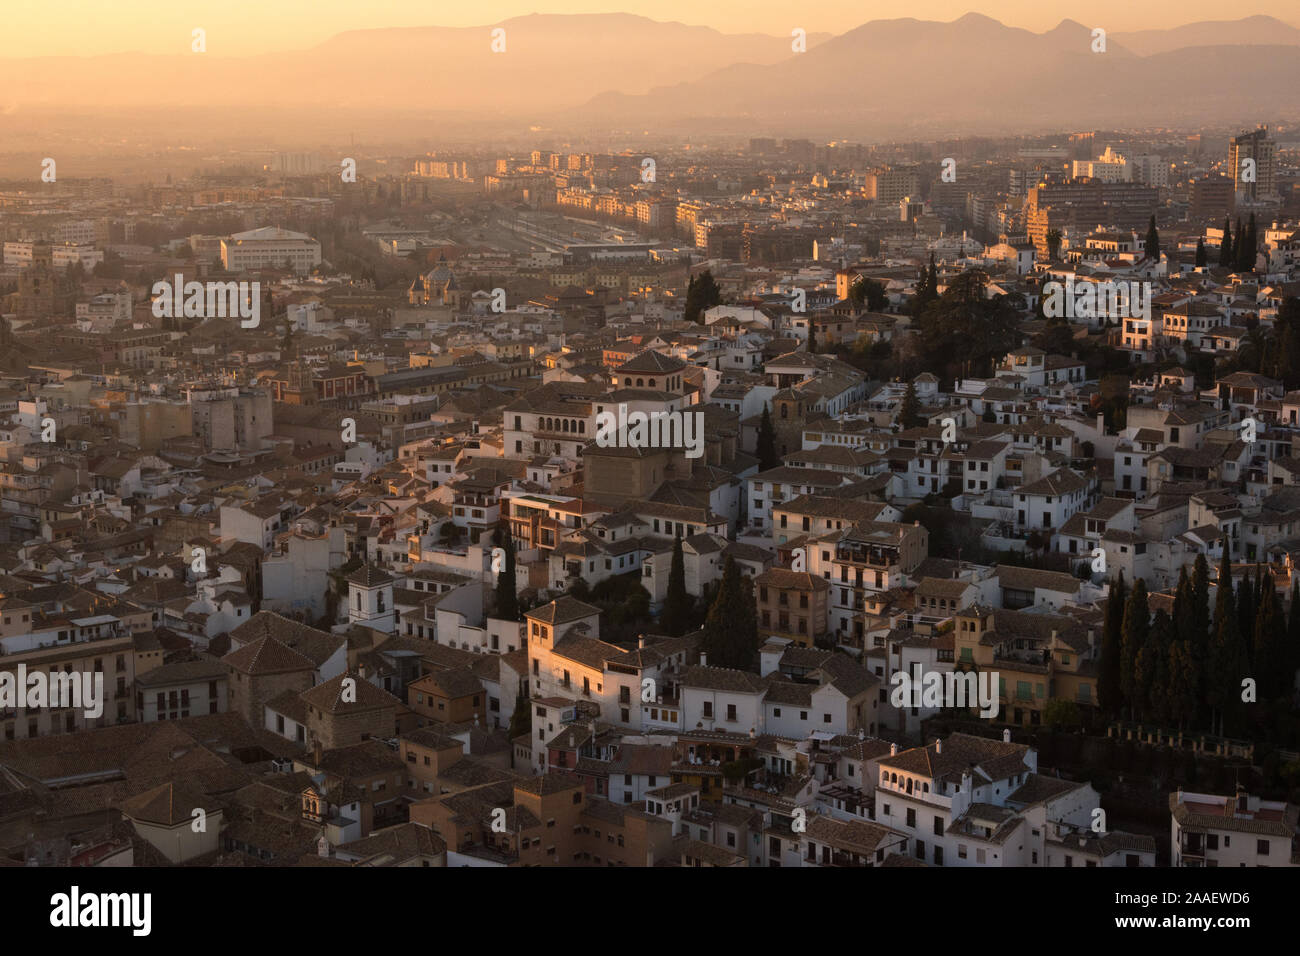 A view across Granada at sunset as seen from the Alhambra Palace Stock Photo